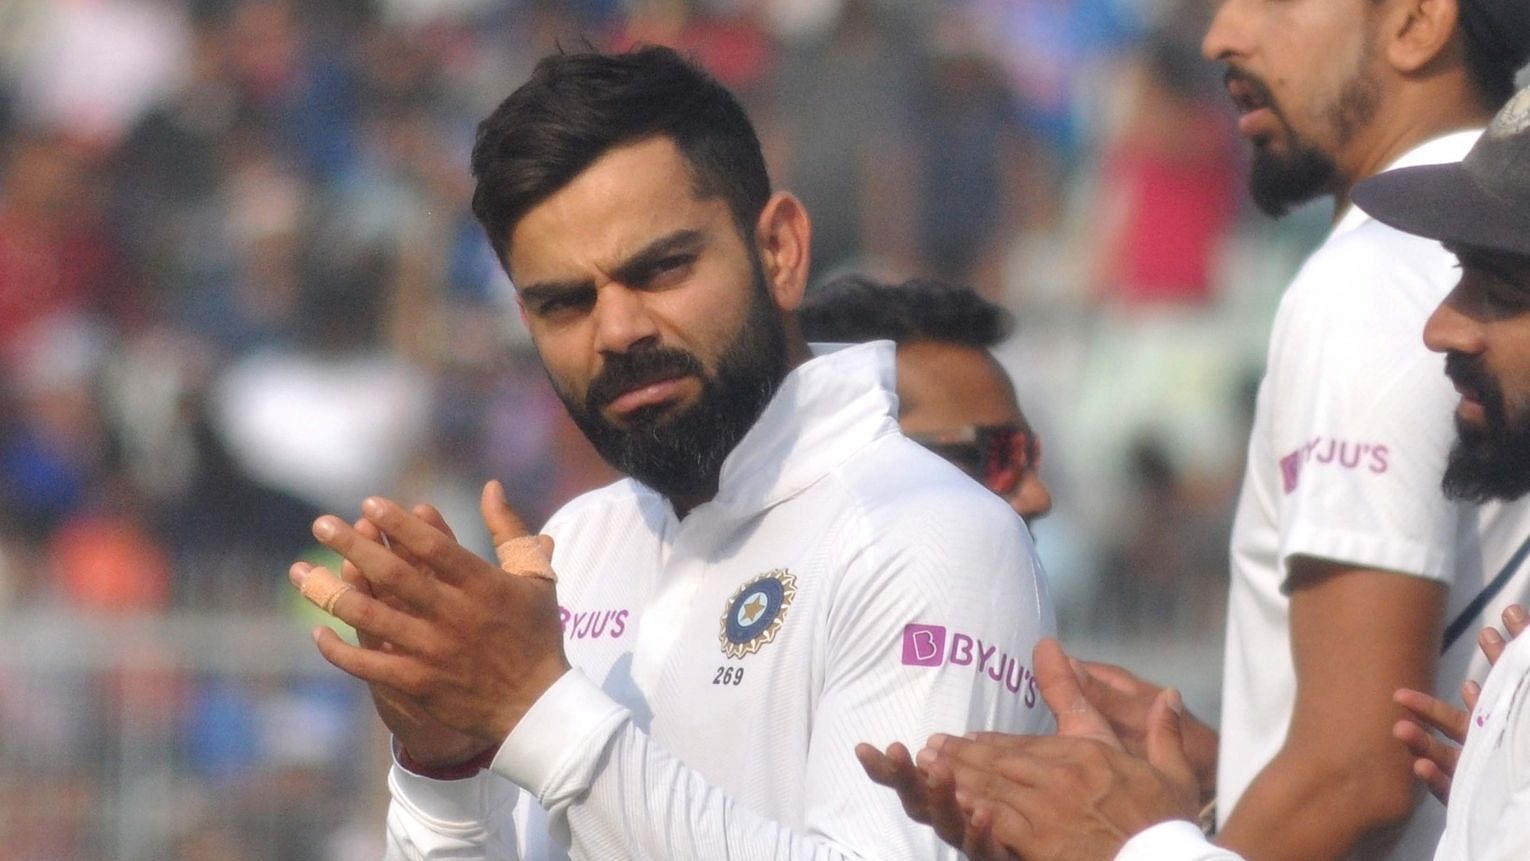 Big stats and records ahead of the India vs New Zealand Test series.